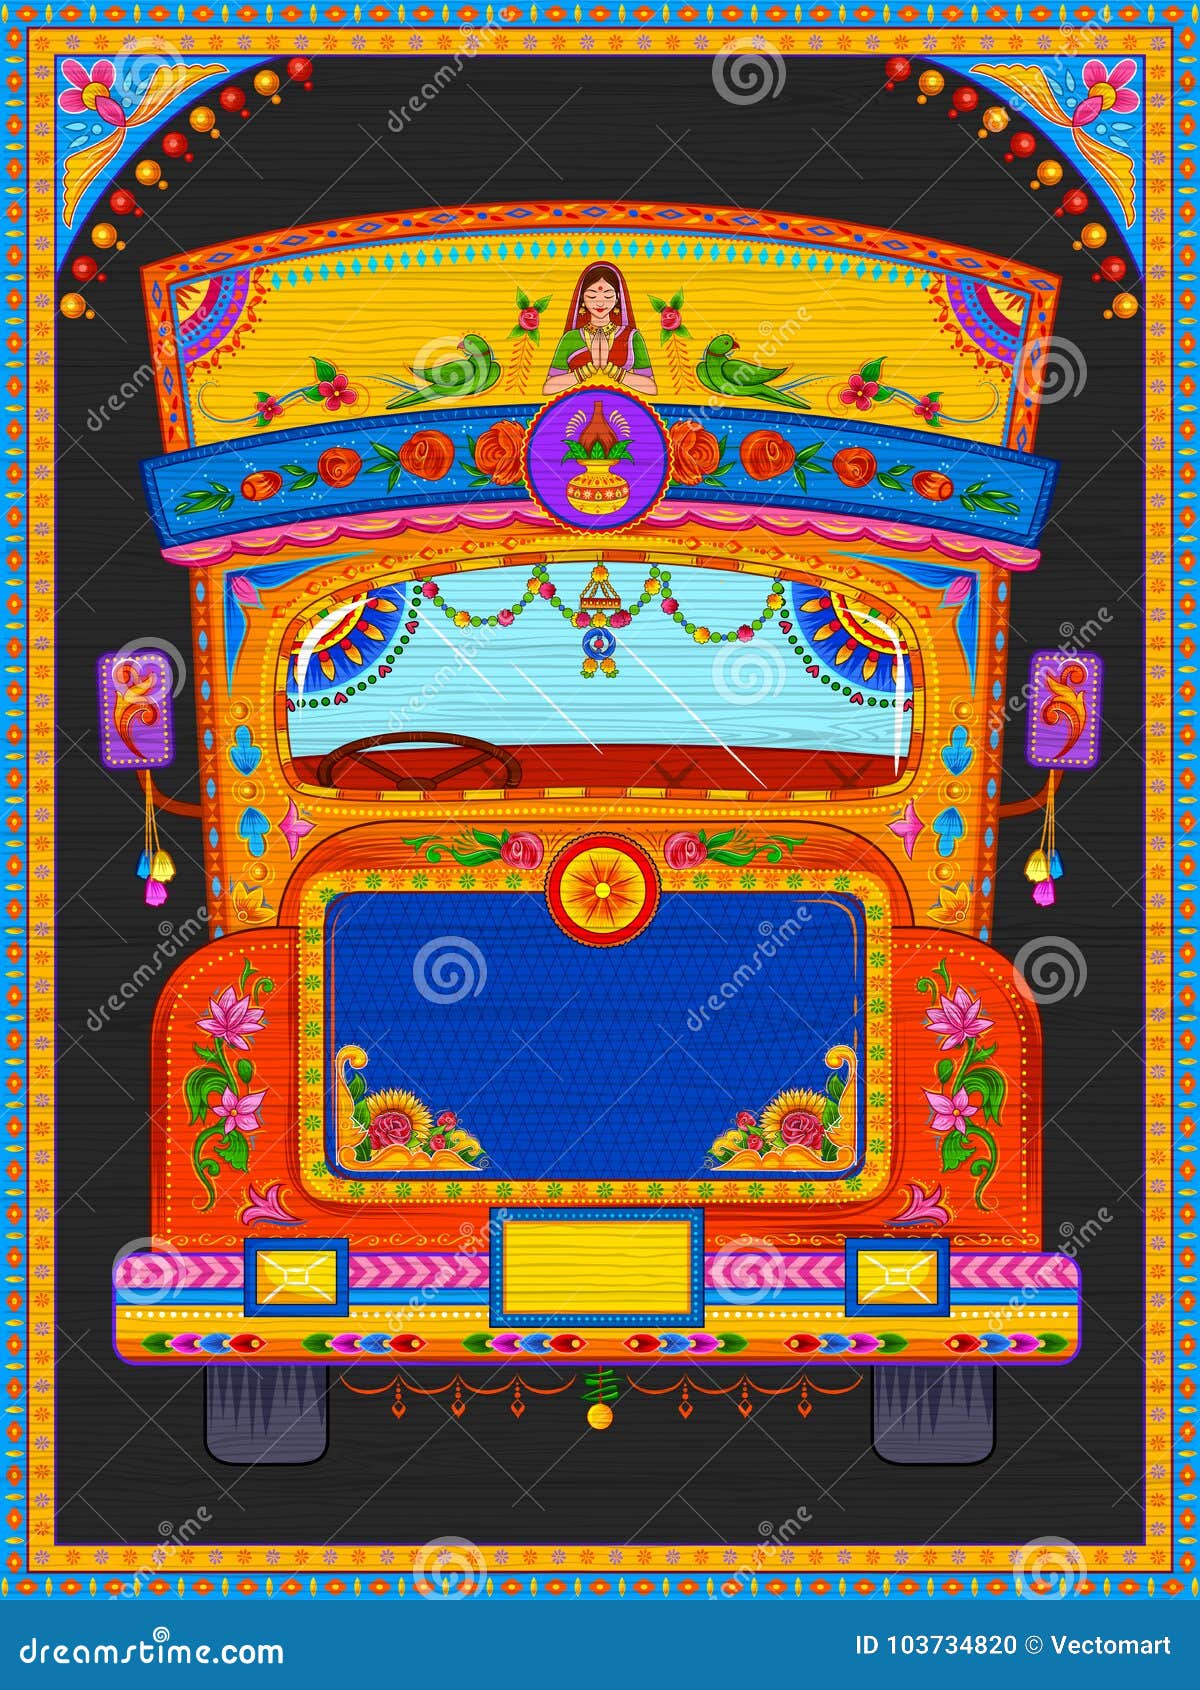 colorful welcome banner in truck art kitsch style of india